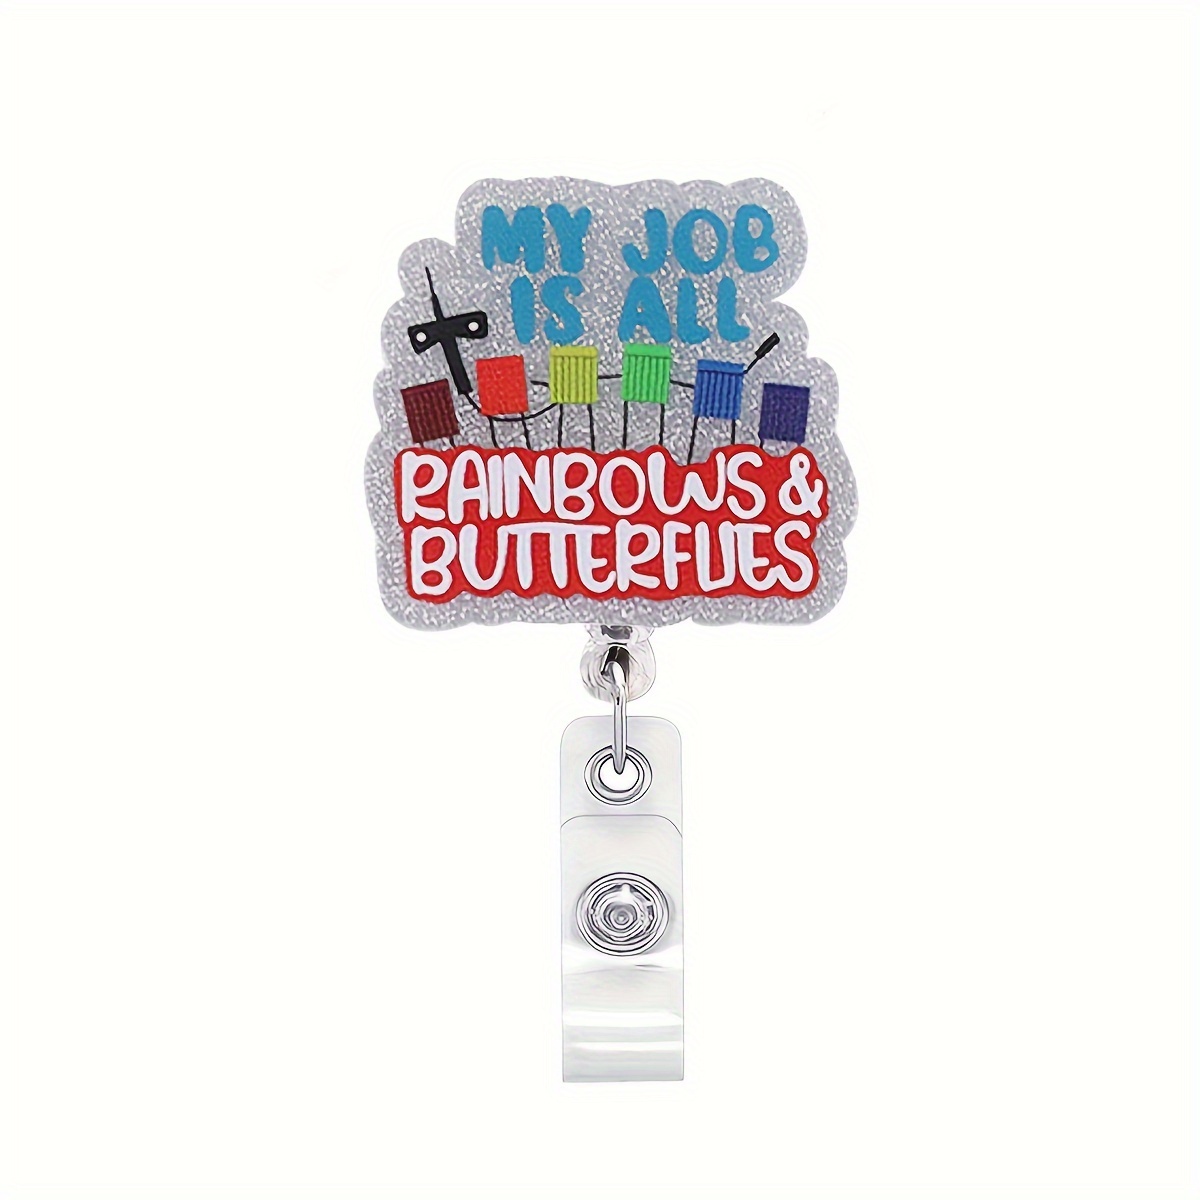 Love Me Some Ladybugs Retractable Badge Reels features a coordinated bead  bundle for an added splash of colour and fun